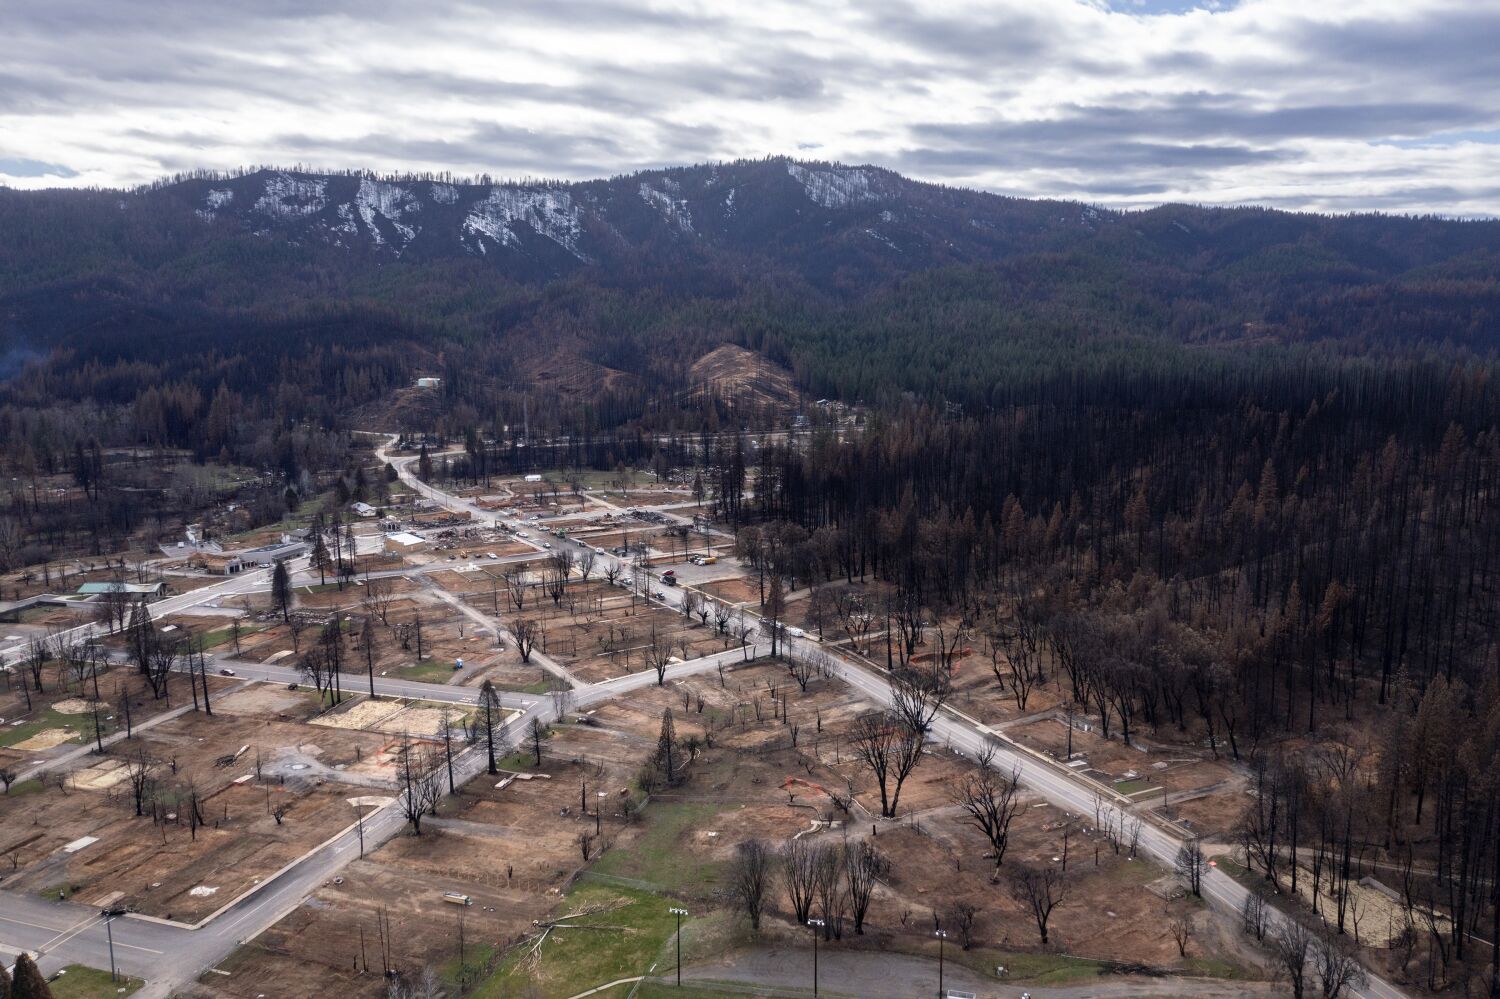 California spends billions rebuilding burned towns. The case for calling it quits